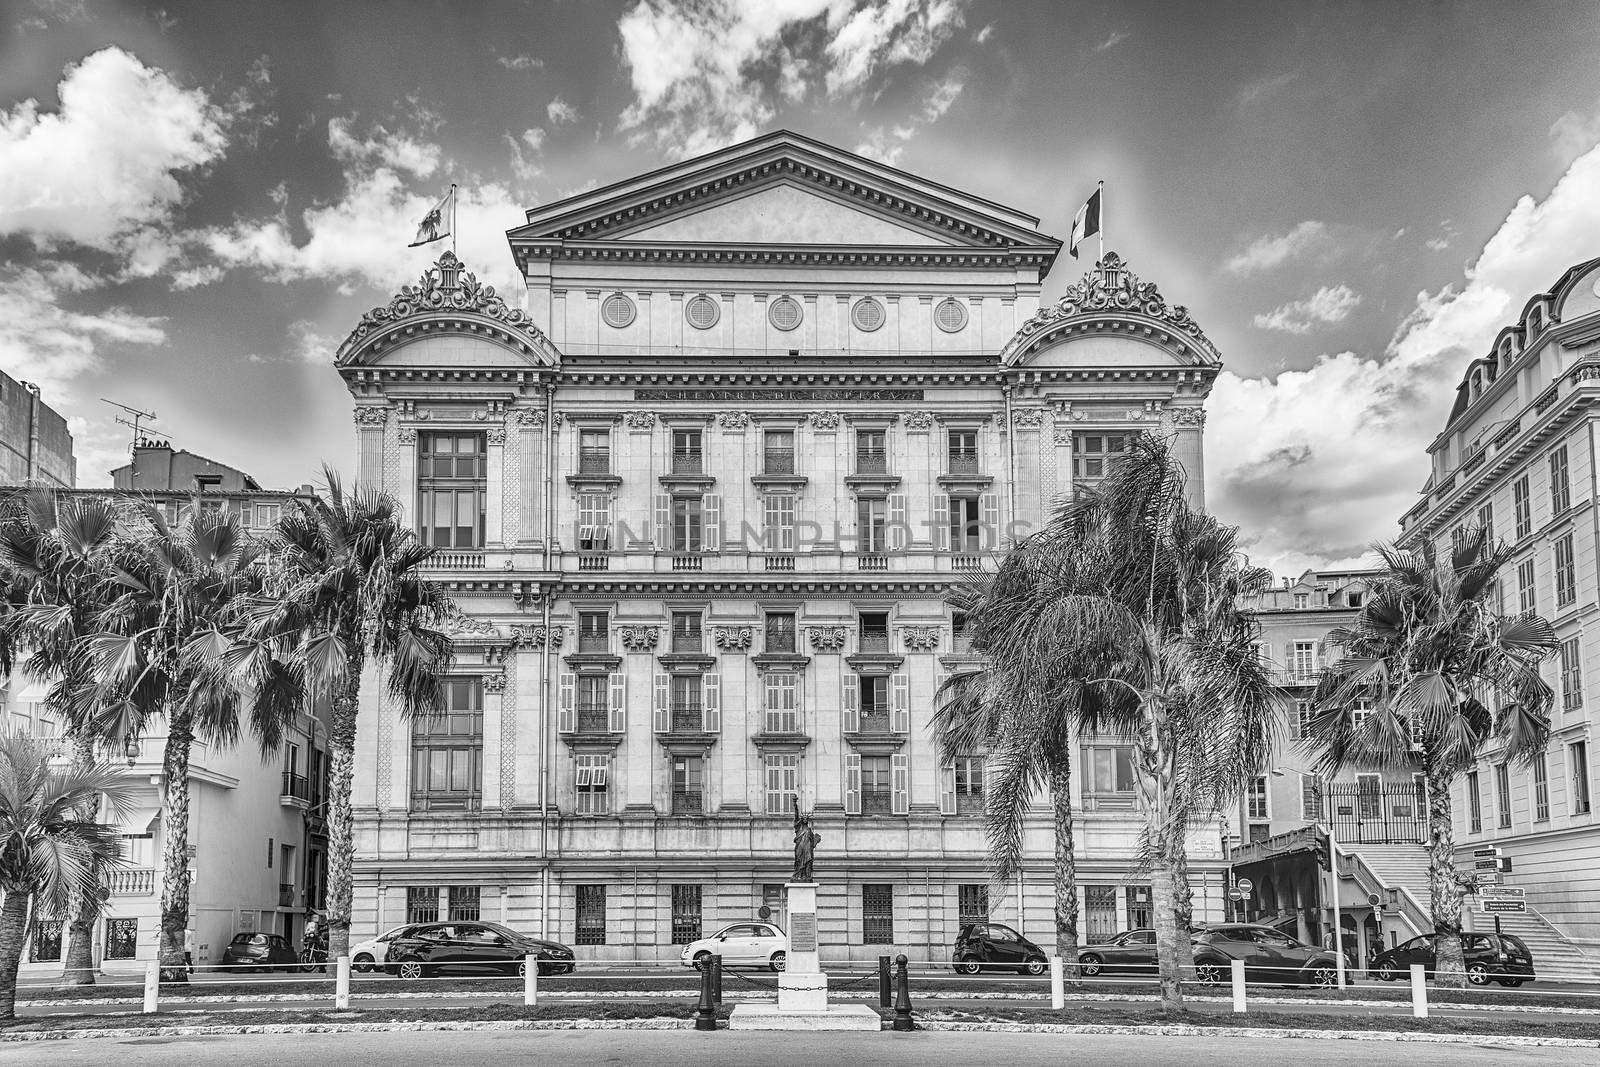 Southern facade of the Opera House, iconic theatre and major landmark on the Promenade des Anglais, Nice, Cote d'Azur, France